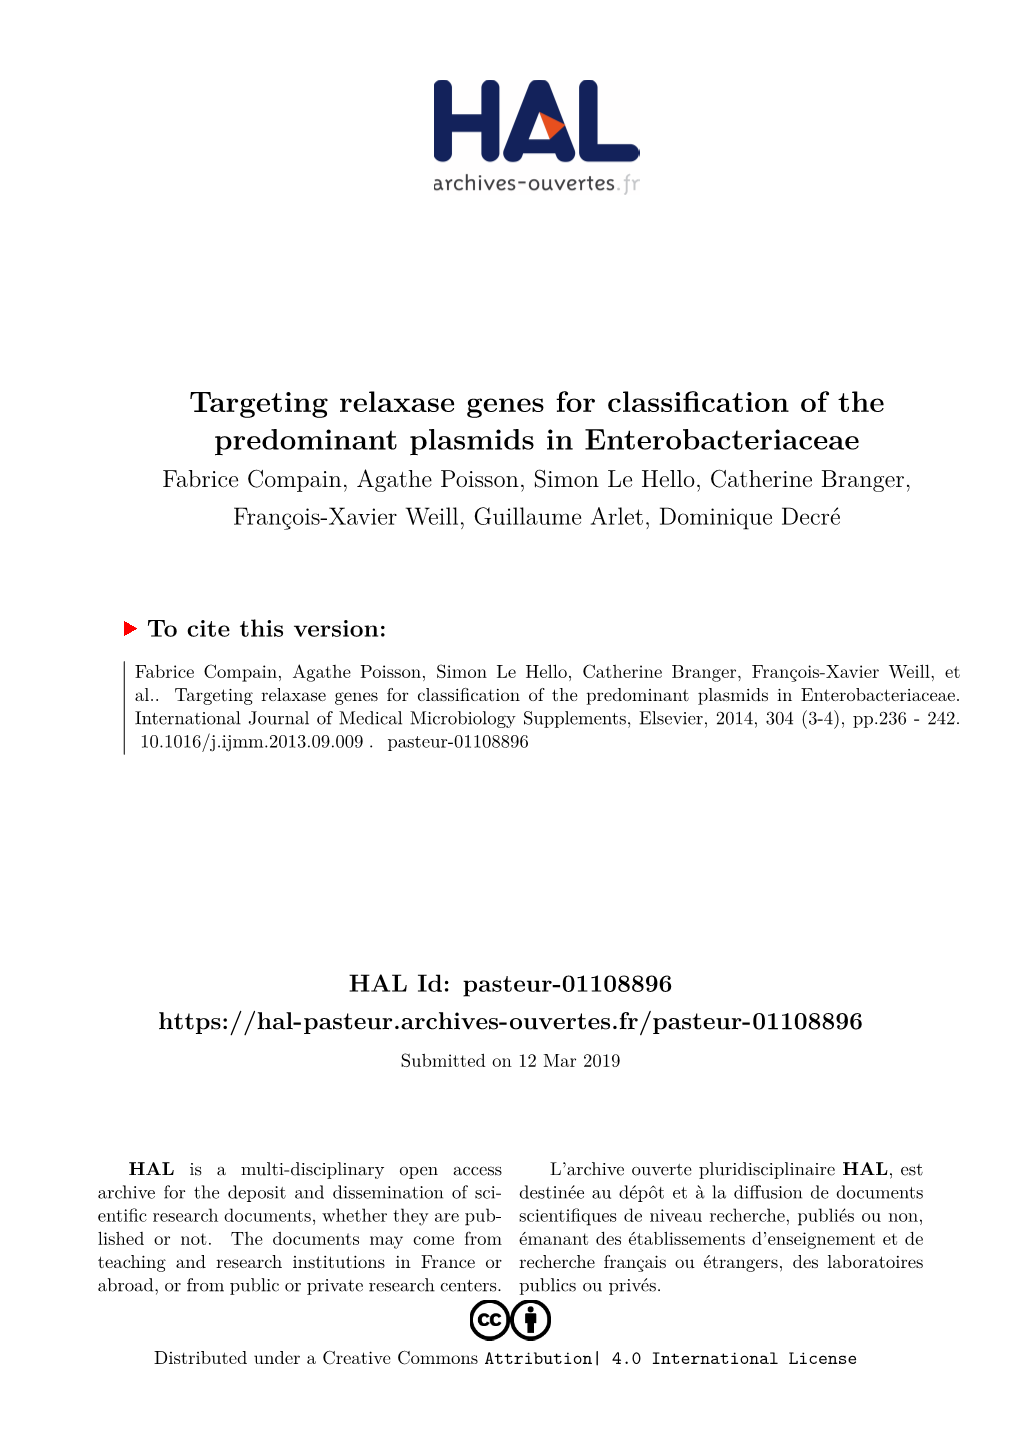 Targeting Relaxase Genes for Classification of the Predominant